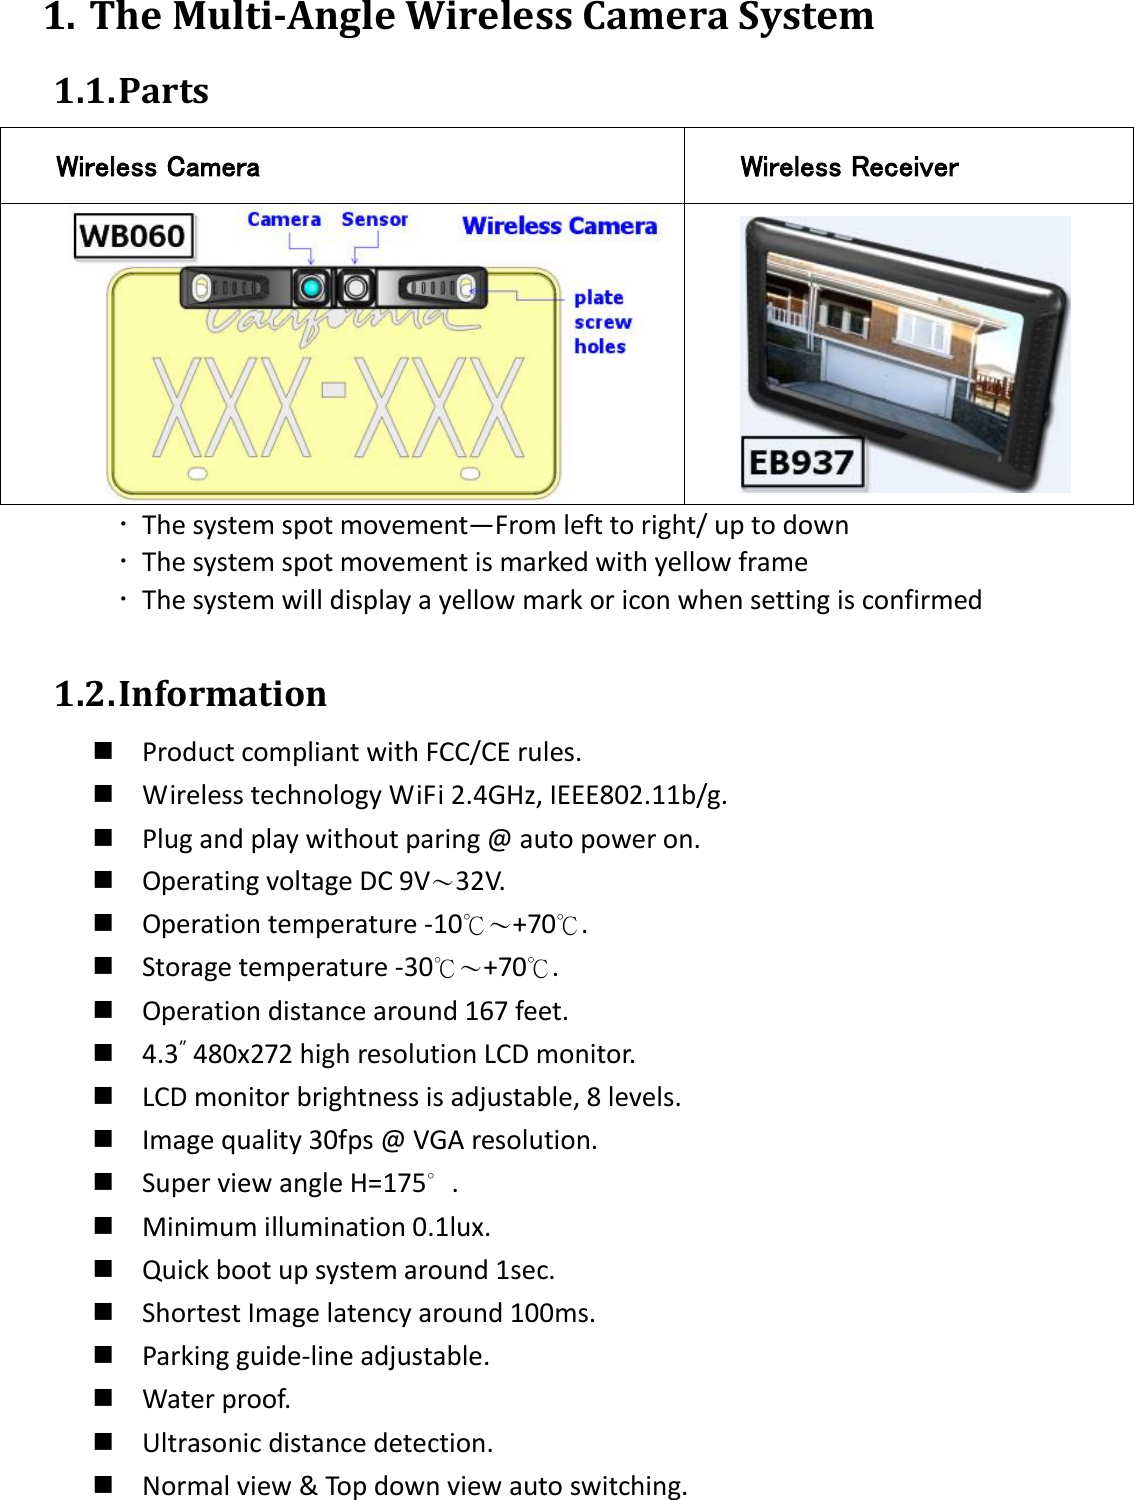  1. The Multi-Angle Wireless Camera System 1.1. Parts Wireless Camera Wireless Receiver    The system spot movement—From left to right/ up to down  The system spot movement is marked with yellow frame  The system will display a yellow mark or icon when setting is confirmed  1.2. Information  Product compliant with FCC/CE rules.  Wireless technology WiFi 2.4GHz, IEEE802.11b/g.  Plug and play without paring @ auto power on.  Operating voltage DC 9V〜32V.  Operation temperature -10℃〜+70℃.  Storage temperature -30℃〜+70℃.  Operation distance around 167 feet.  4.3″ 480x272 high resolution LCD monitor.  LCD monitor brightness is adjustable, 8 levels.  Image quality 30fps @ VGA resolution.  Super view angle H=175∘.  Minimum illumination 0.1lux.  Quick boot up system around 1sec.  Shortest Image latency around 100ms.  Parking guide-line adjustable.  Water proof.  Ultrasonic distance detection.  Normal view &amp; Top down view auto switching. 